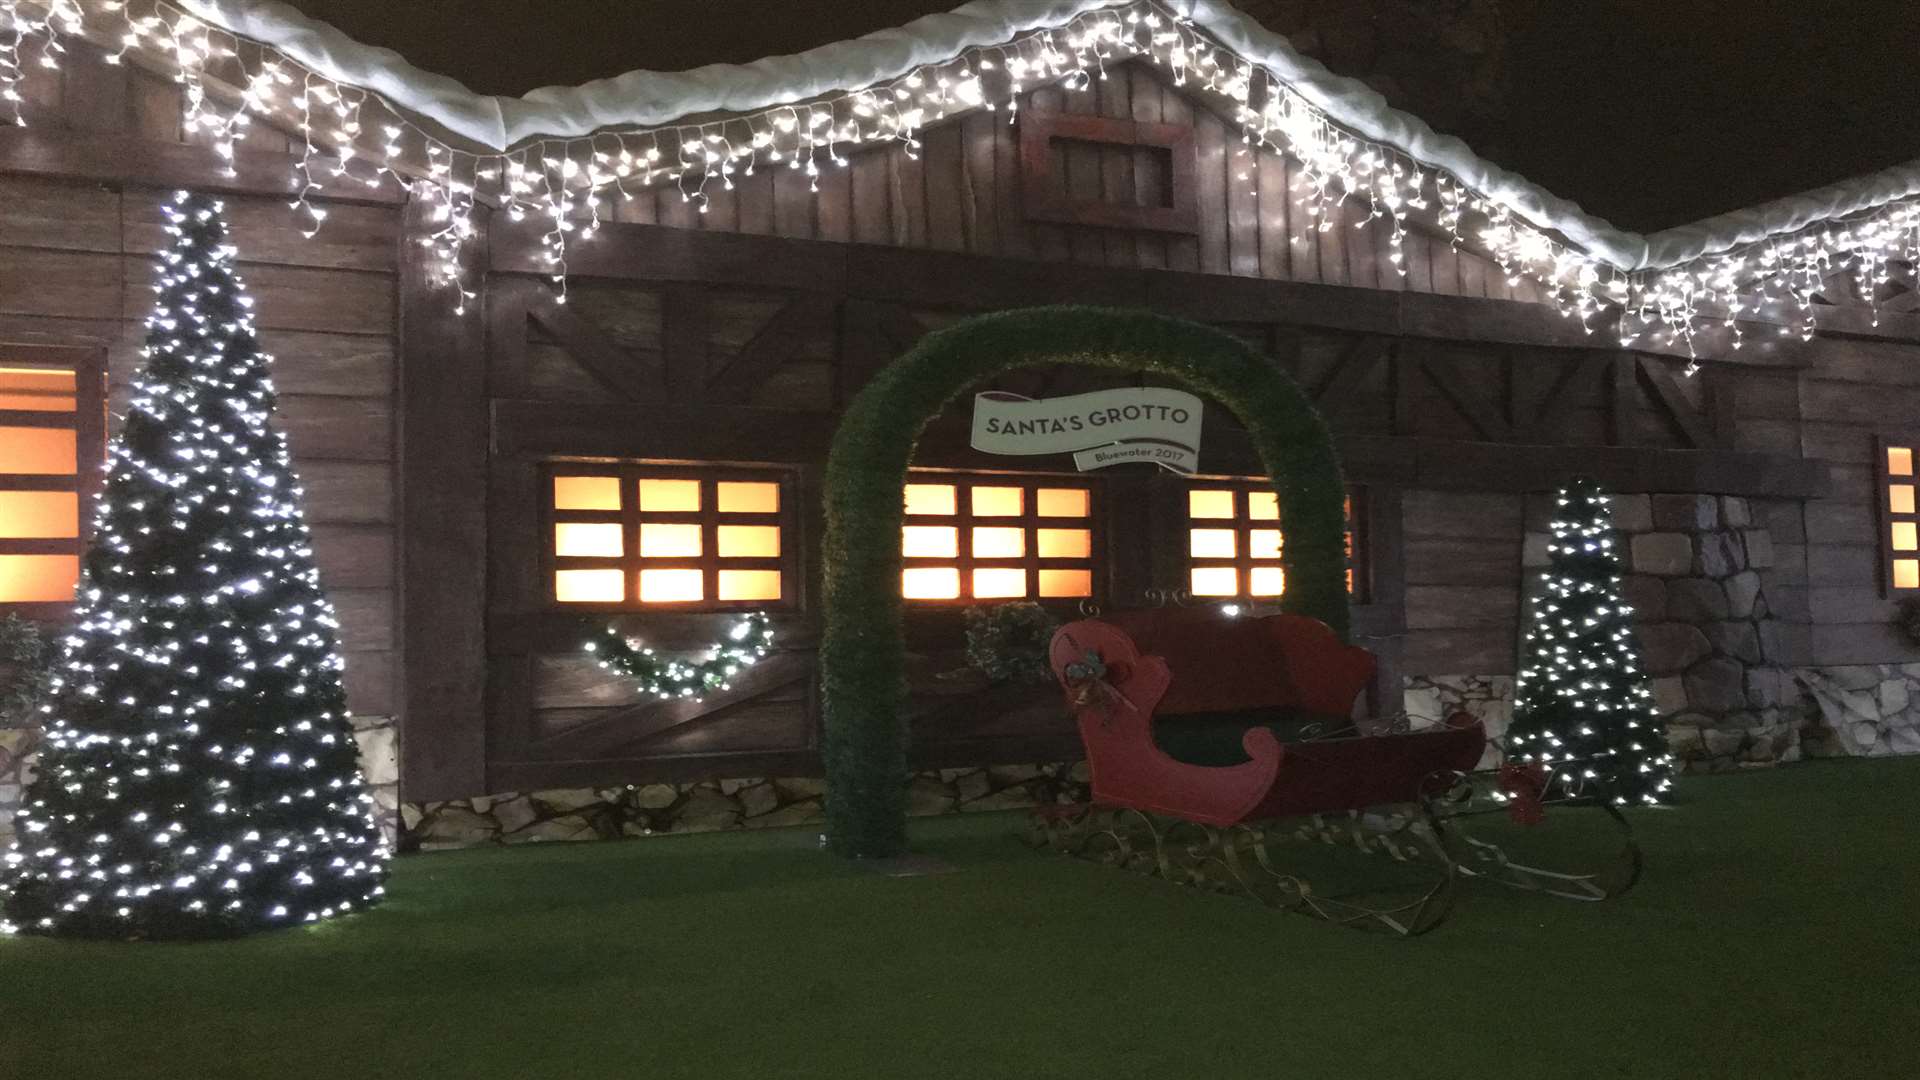 Santa's Grotto will welcome guests until Christmas Eve